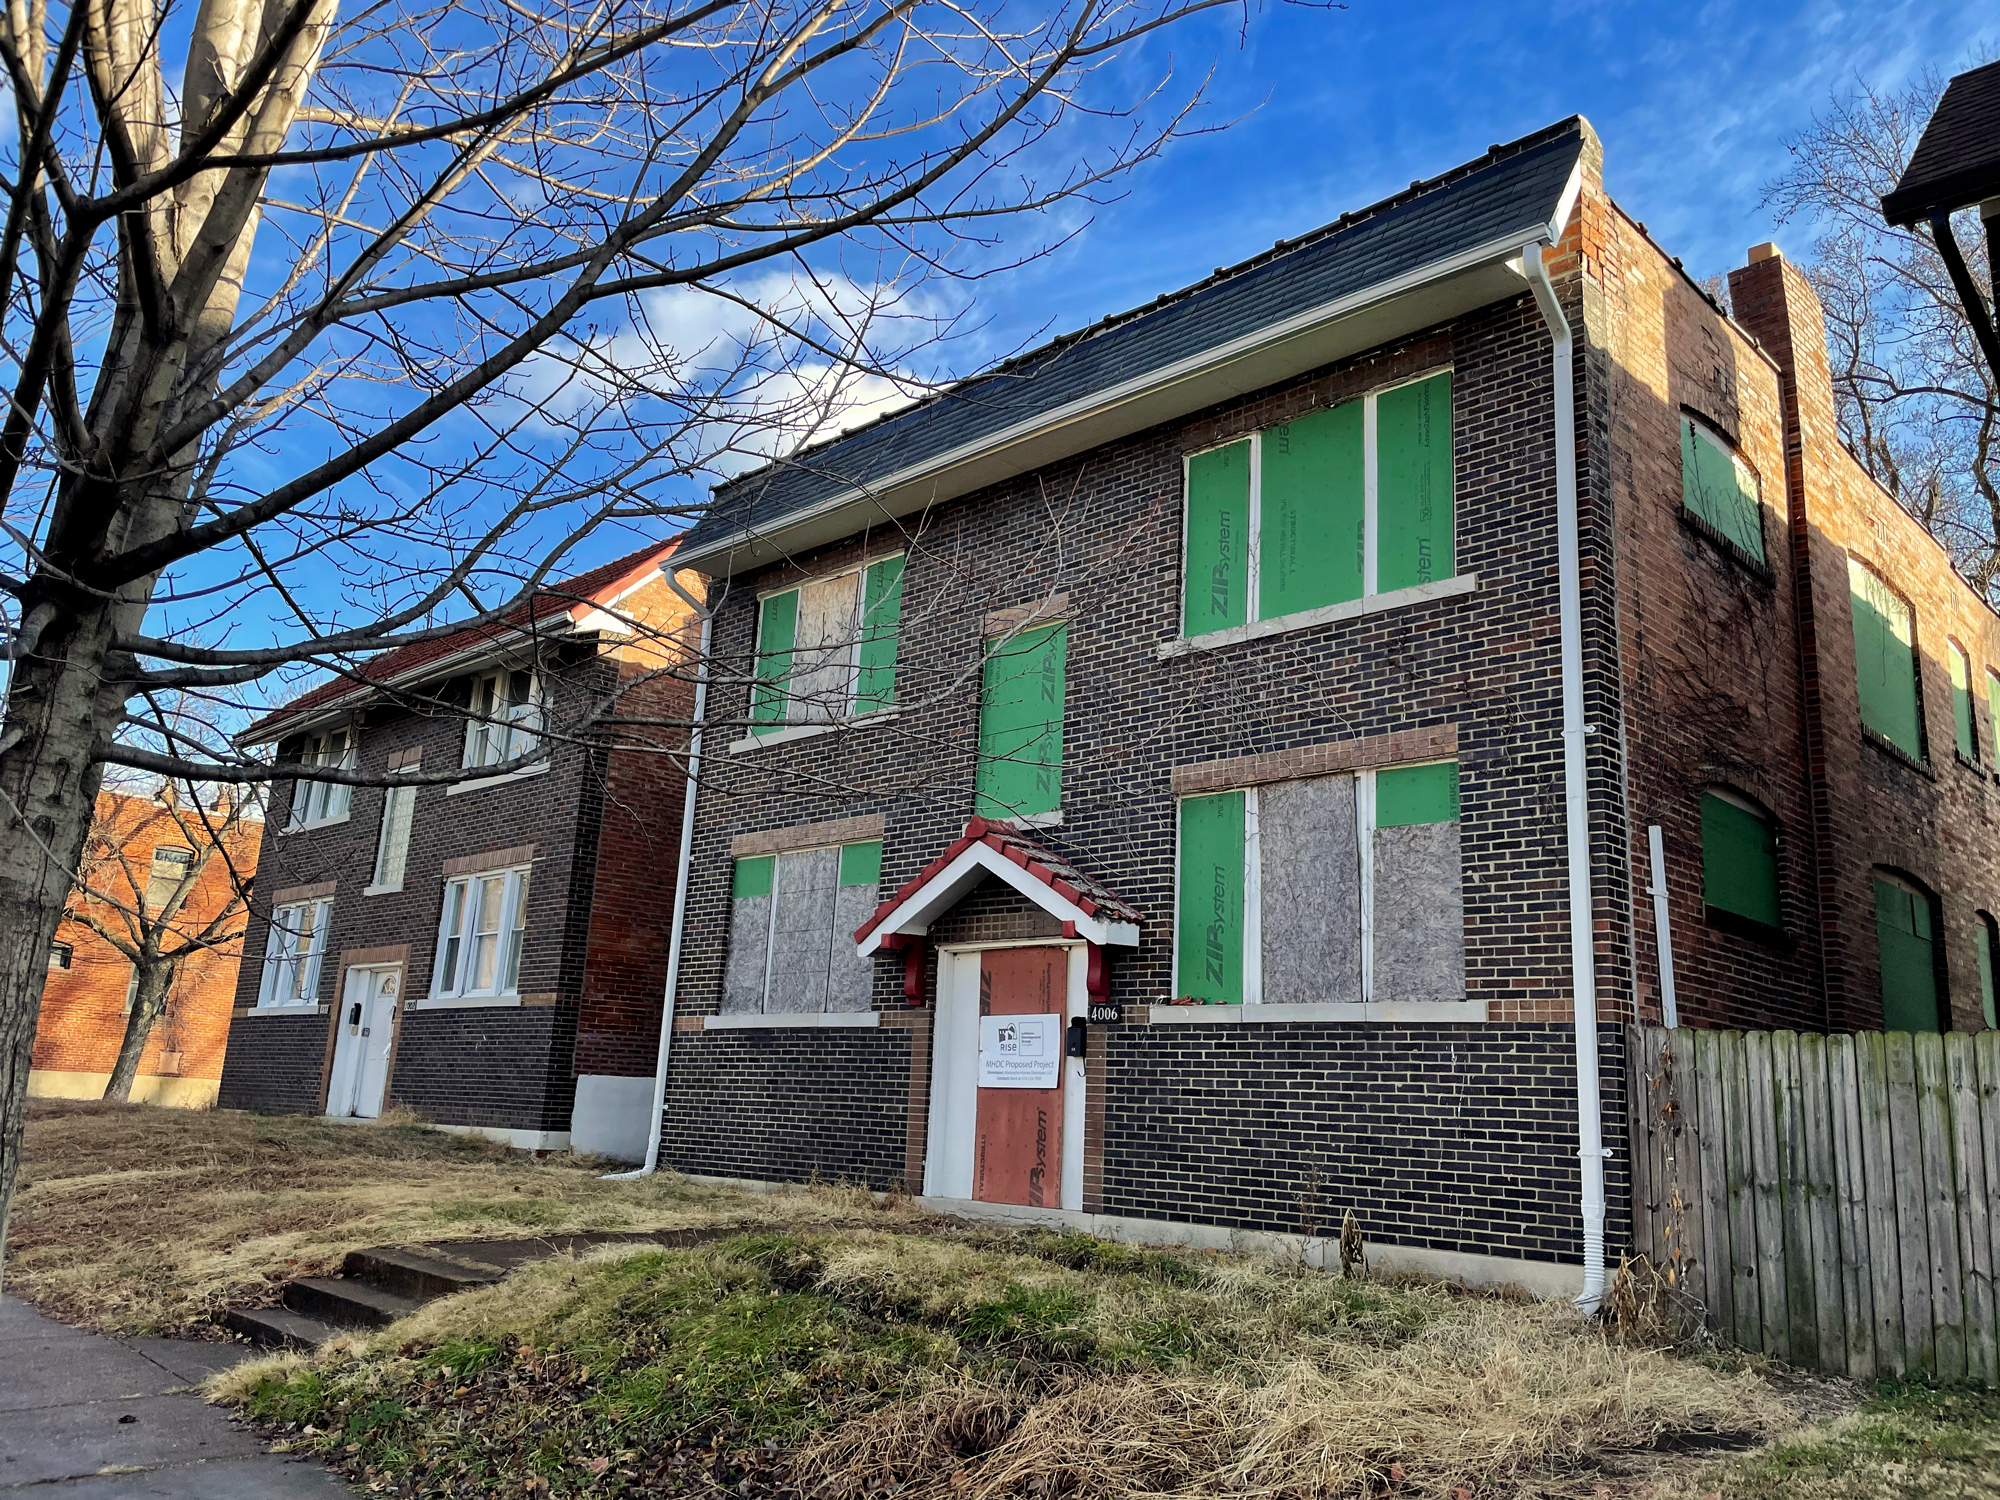 4006 Pennsylvania Avenue, part of Lutheran Development Group's Marquette Homes project in Dutchtown, St. Louis, MO.